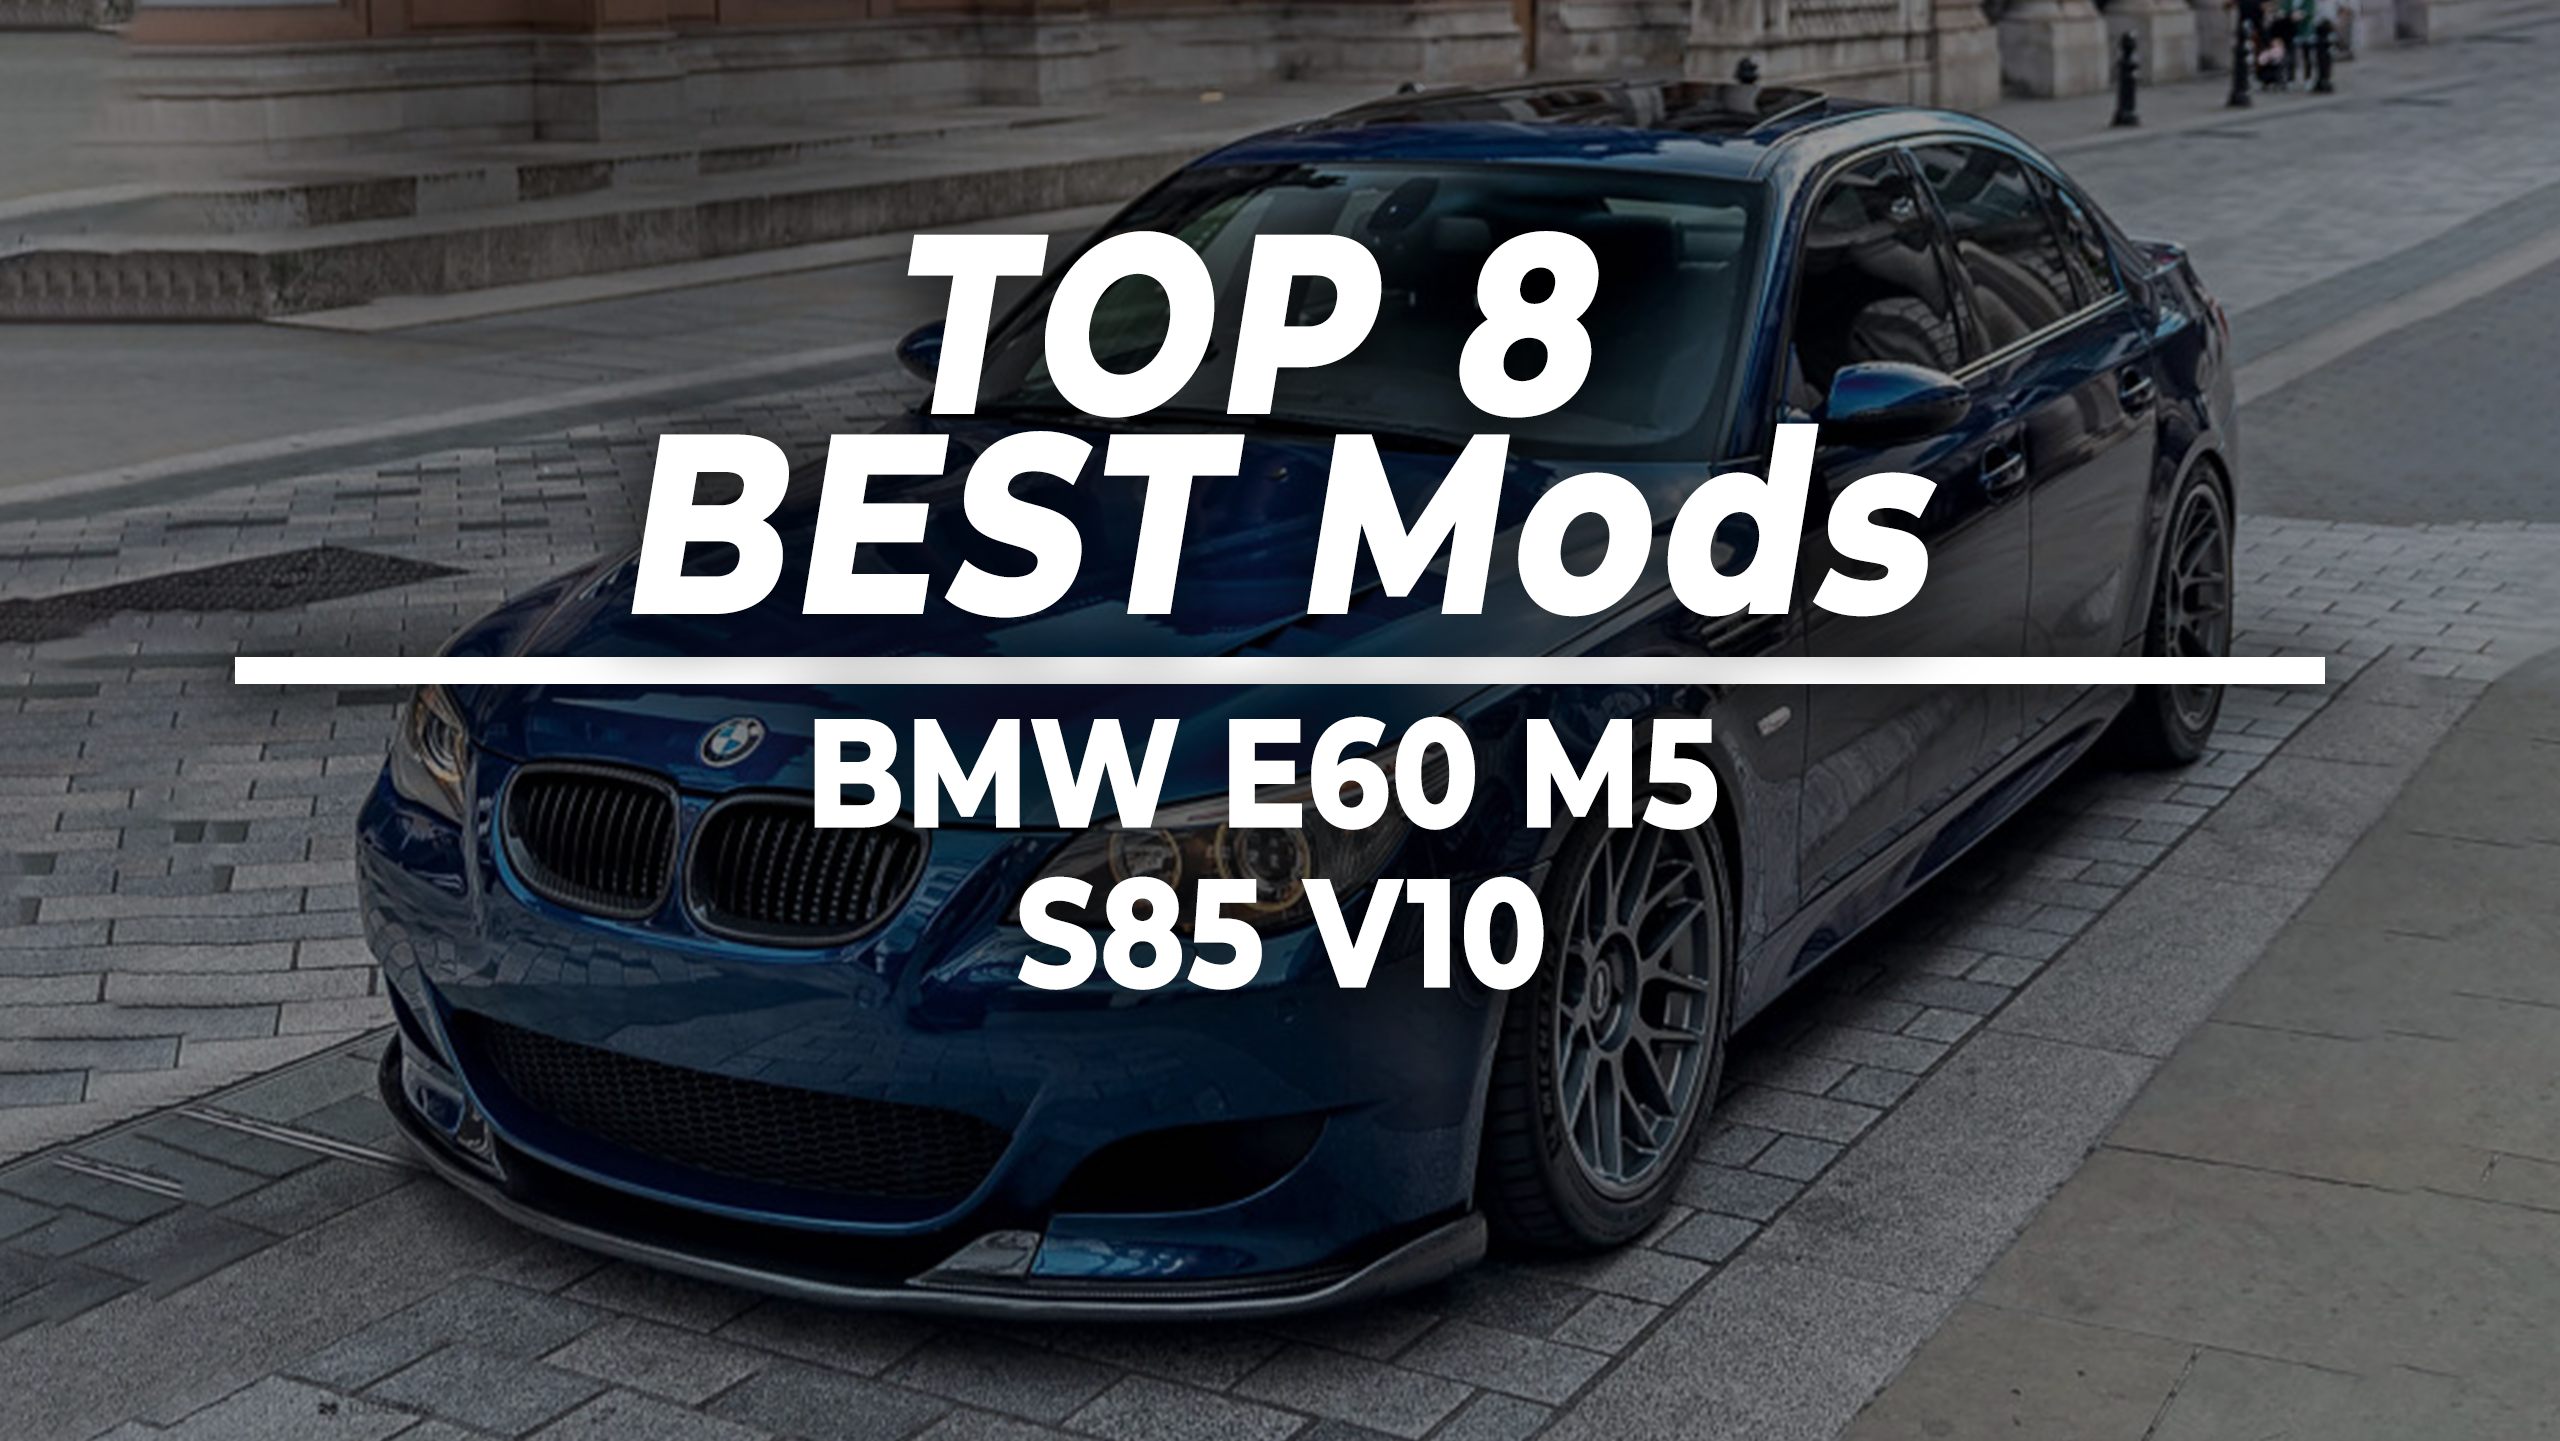 BMW E60 M5 High-Mile Owner Reliability Update